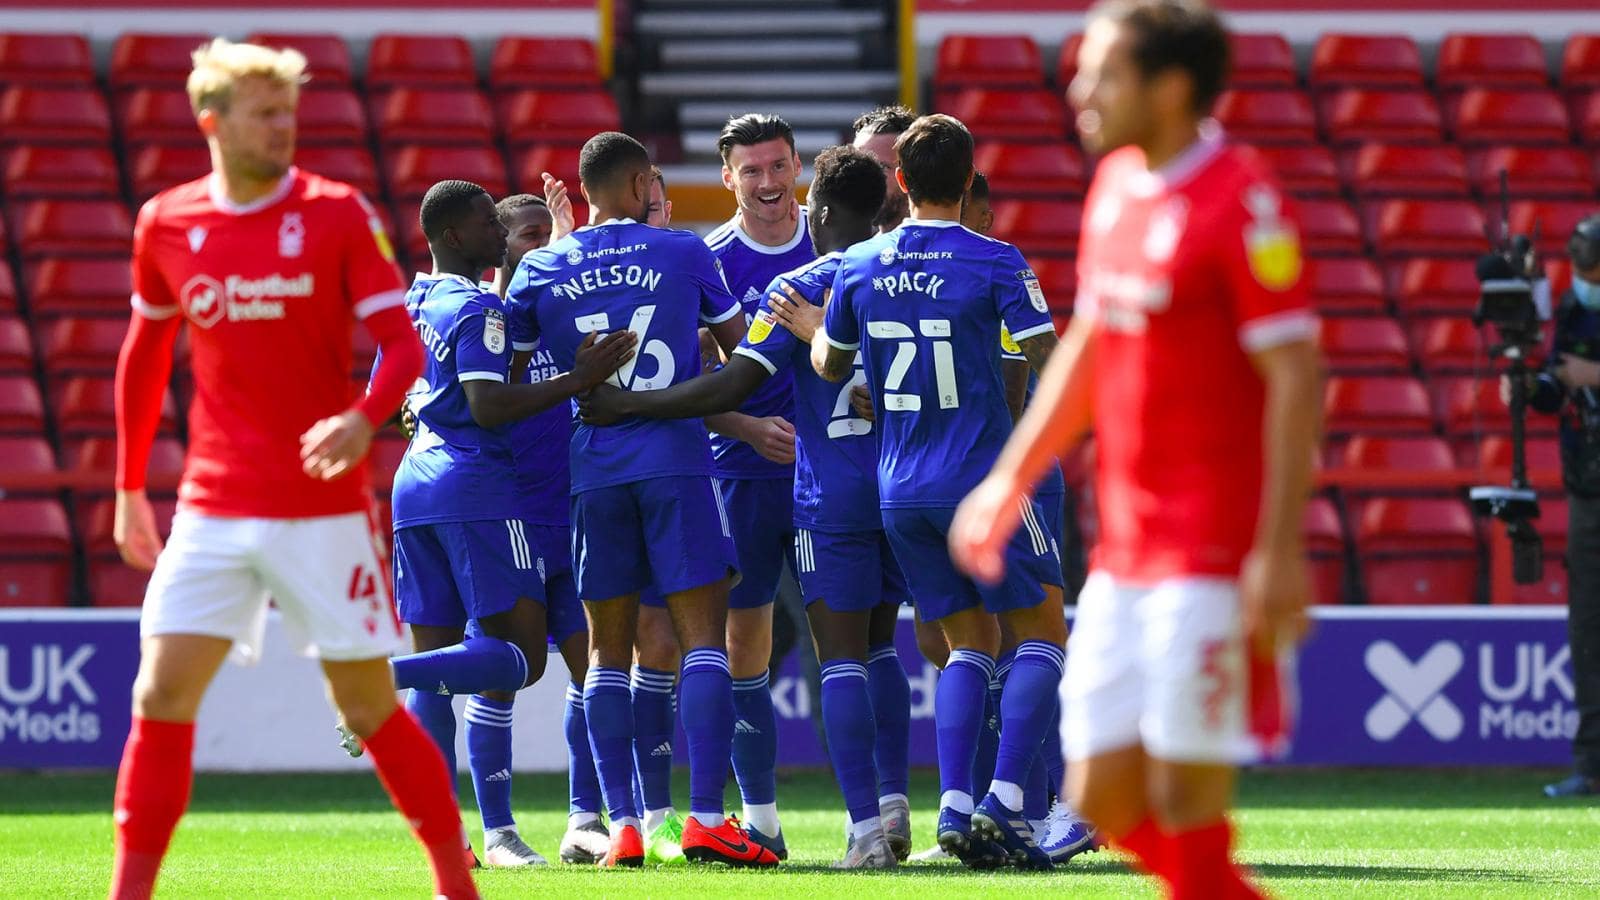 Cardiff City : Other Media